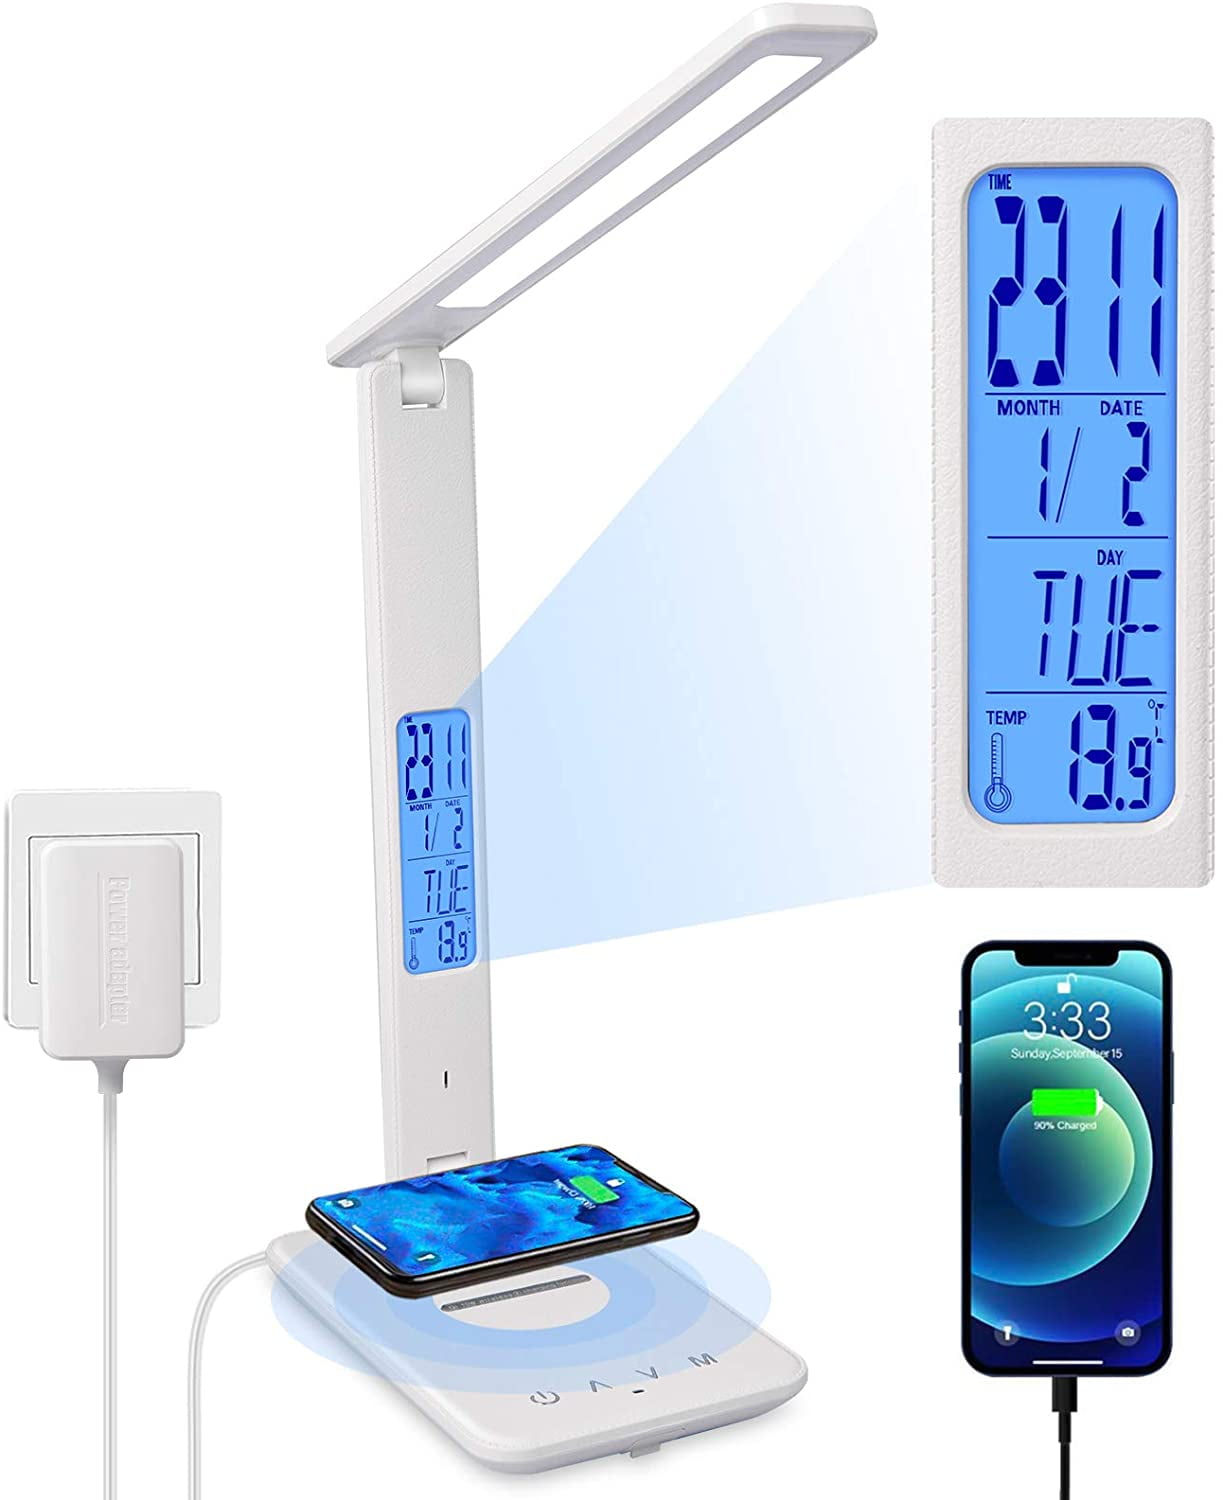 Built-in Clock Calendar Desk Lamp with Wireless Charger LED Desk Lamp Suitable for Home Office Dimmable Desk Lamp Thermometer and Automatic Timing Reading Desk Lamp. with USB Charging Port